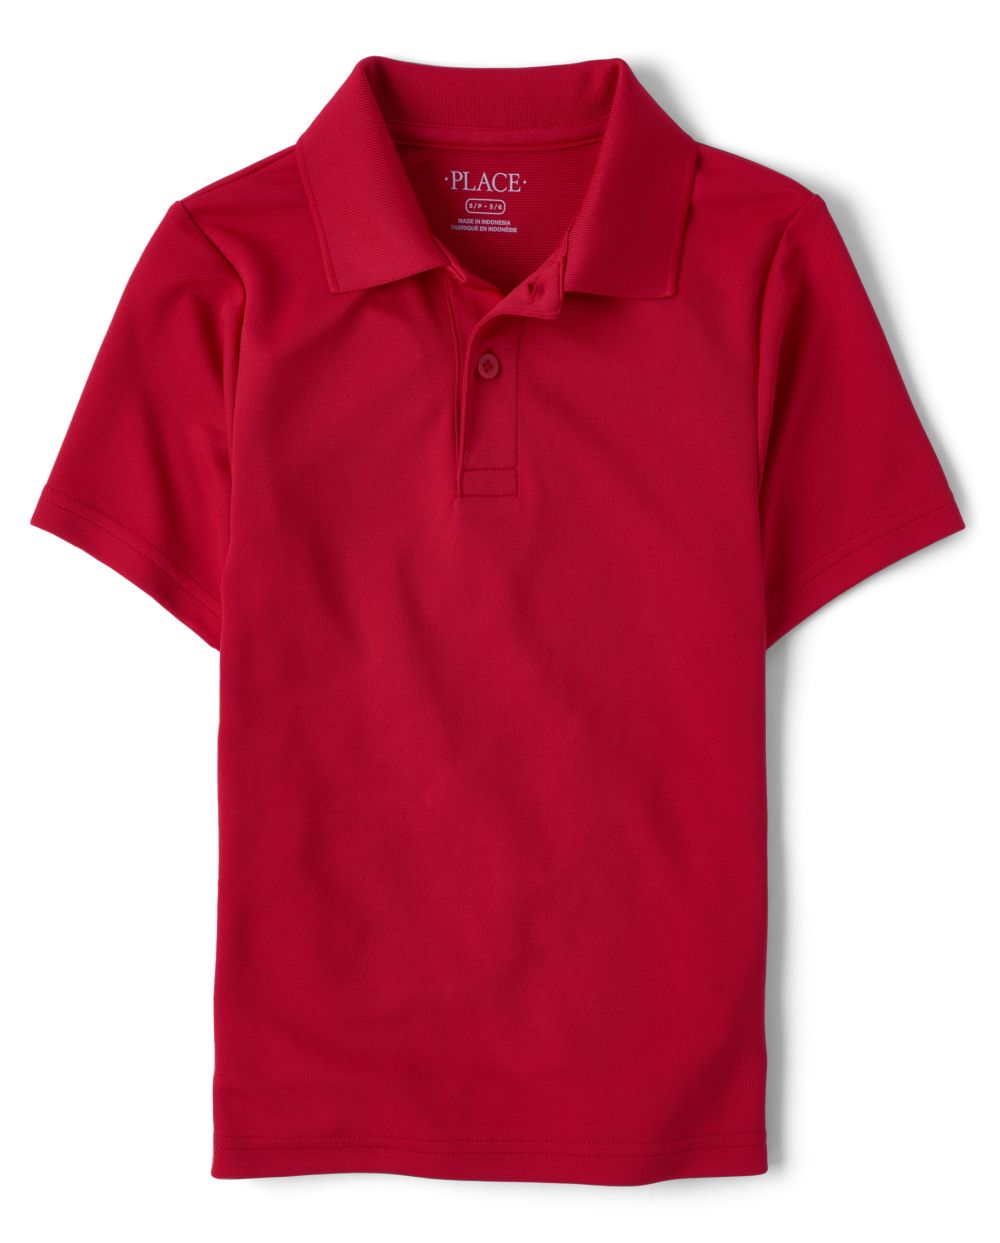 

s Boys Uniform Performance Polo - Red - The Children's Place